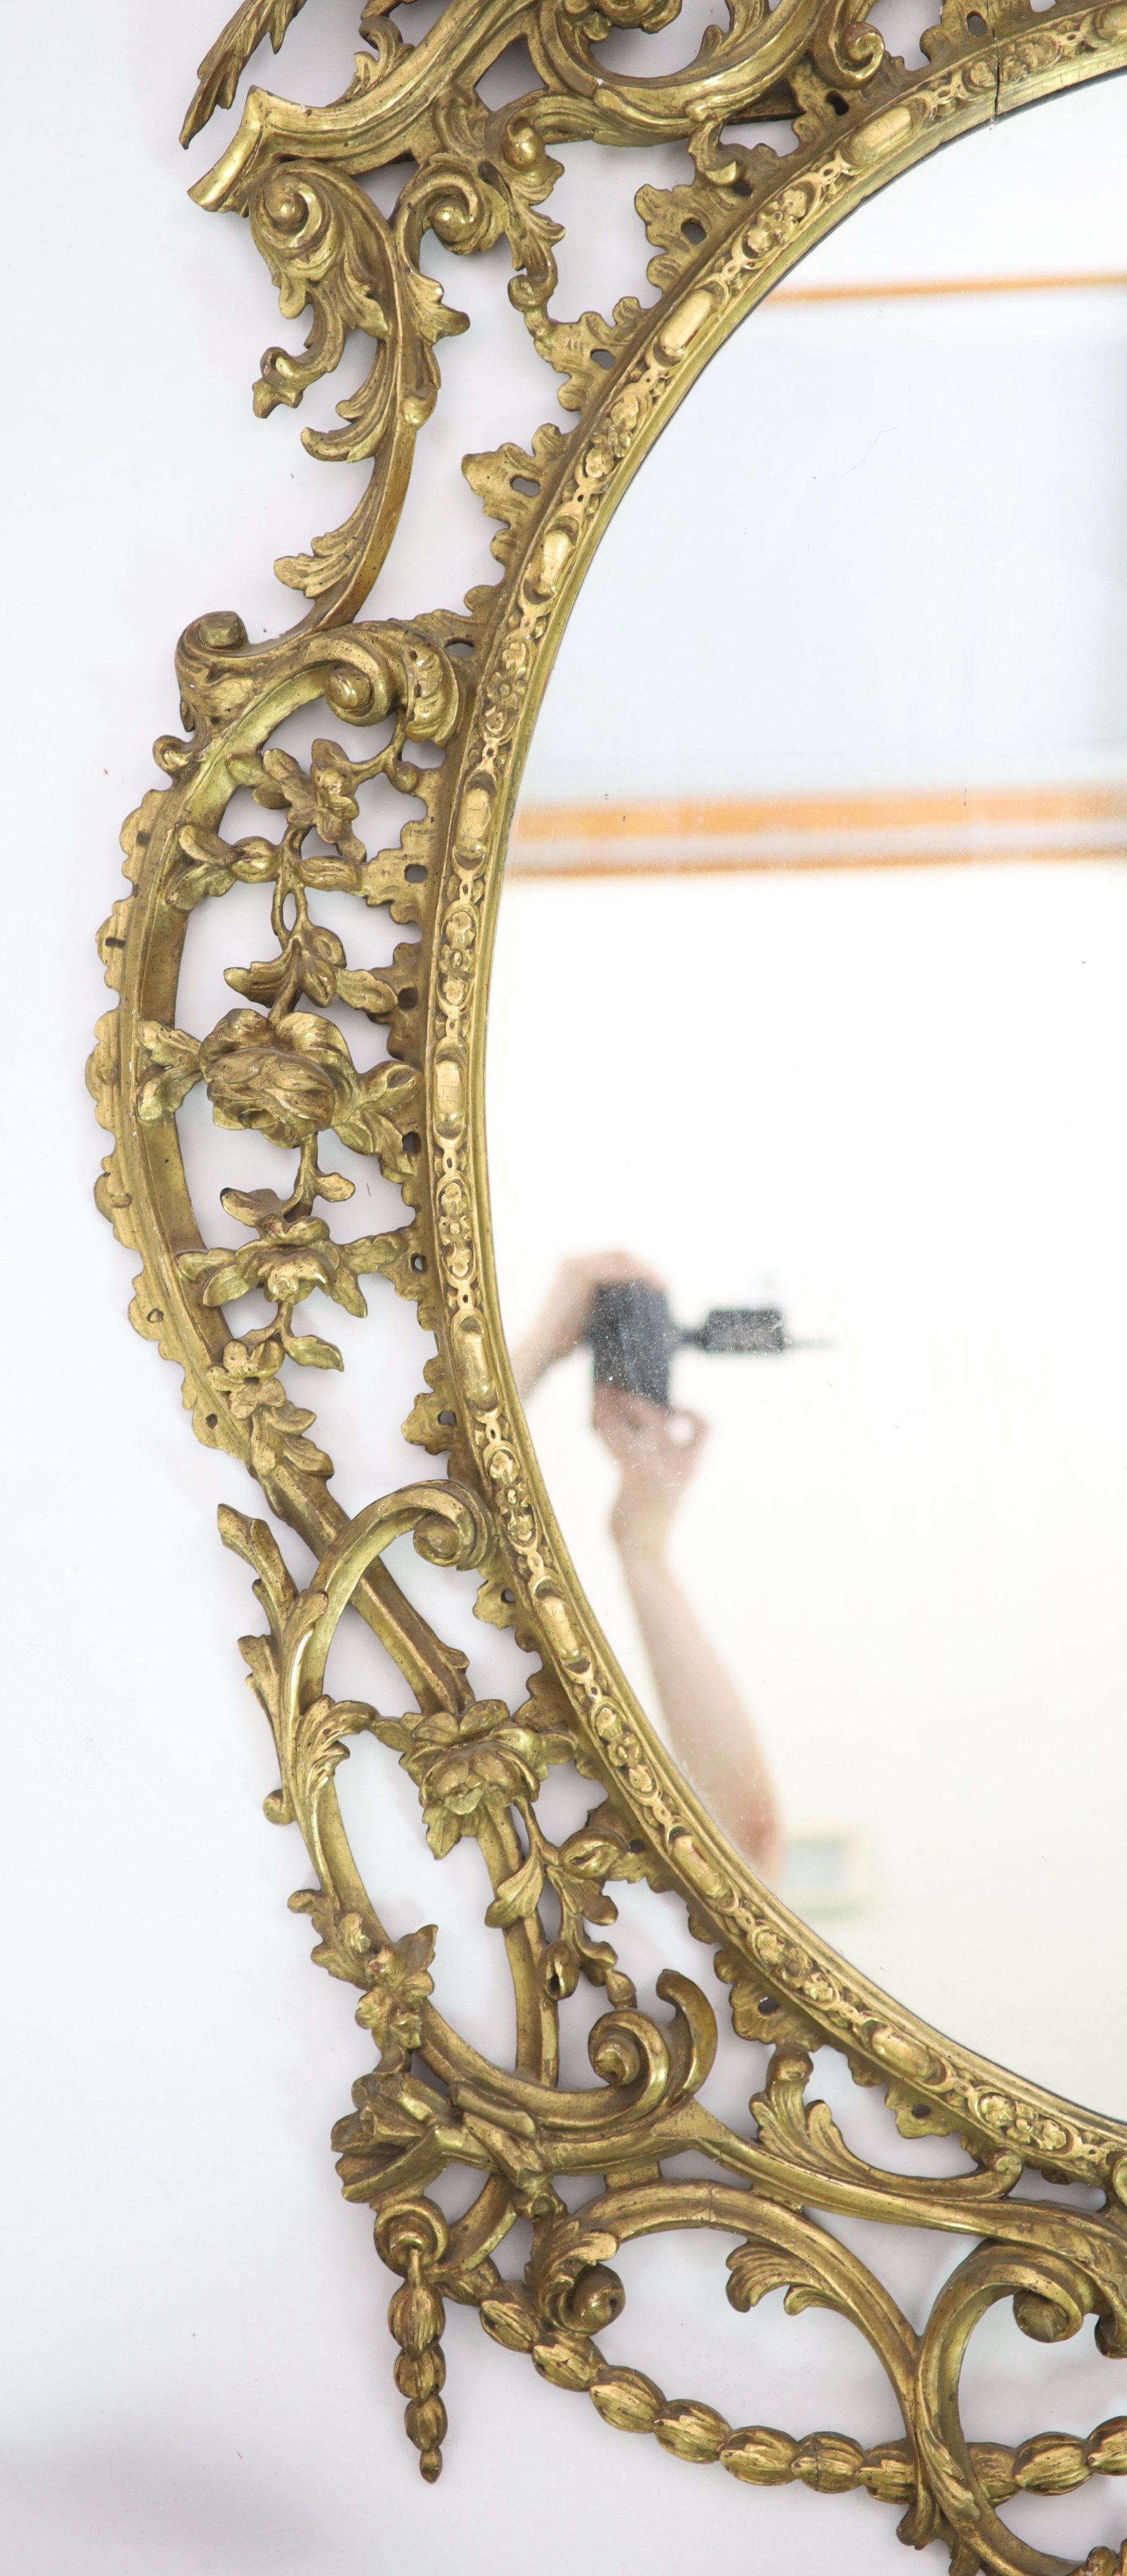 A 19th century Chippendale style gilt and gesso wall mirrorwith ornate foliate scroll frame capped - Image 4 of 5